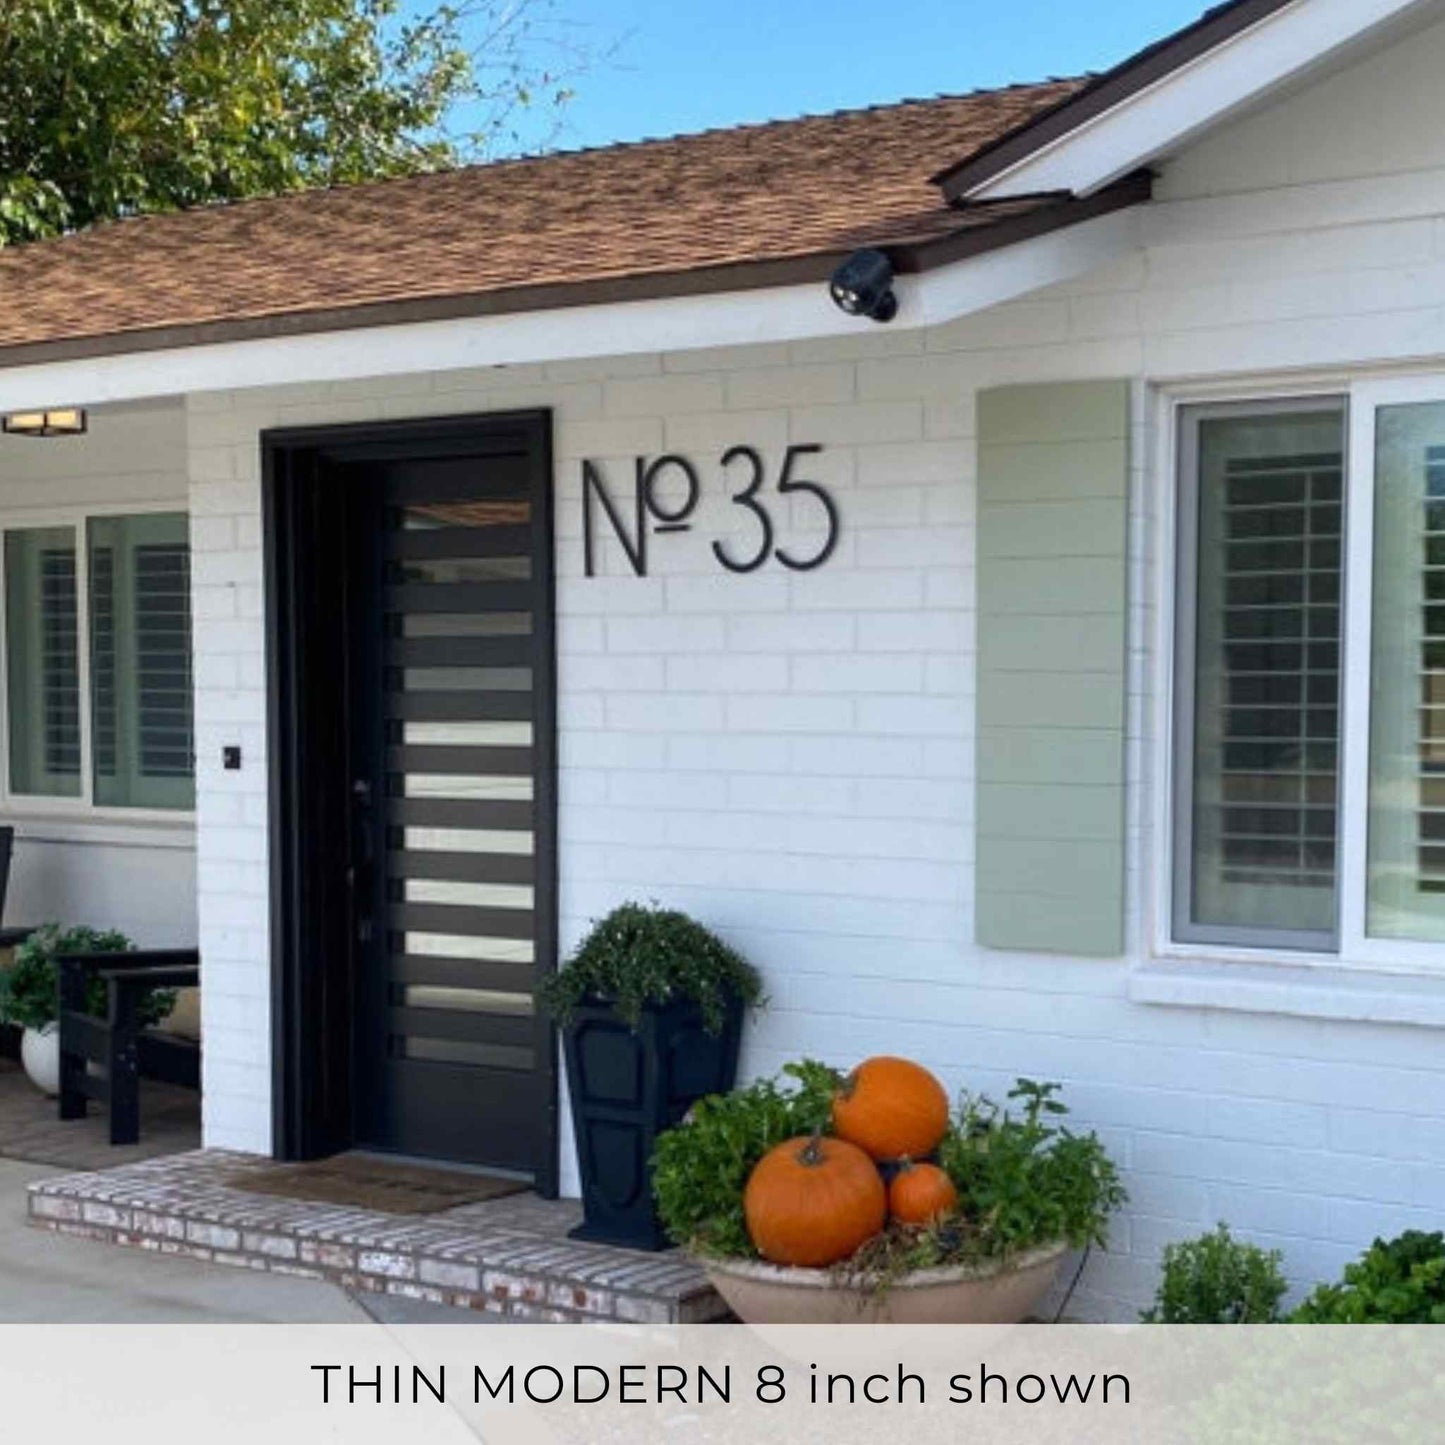 THIN MODERN house numbers and letters